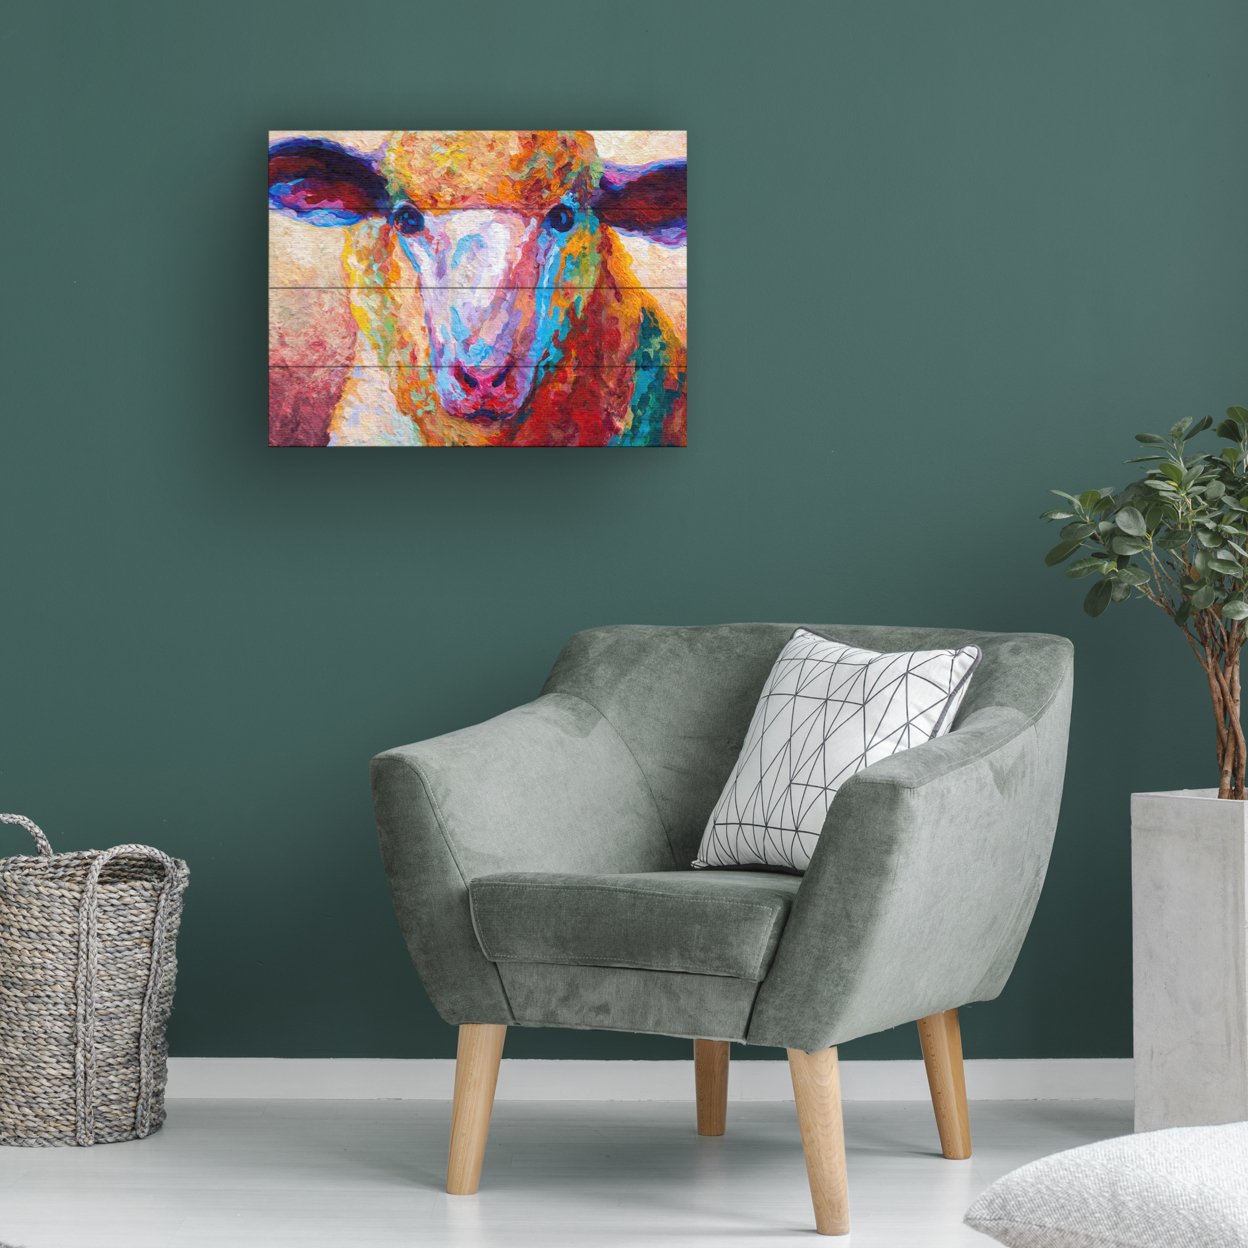 Wall Art 12 X 16 Inches Titled Dorset Ewe Ready To Hang Printed On Wooden Planks